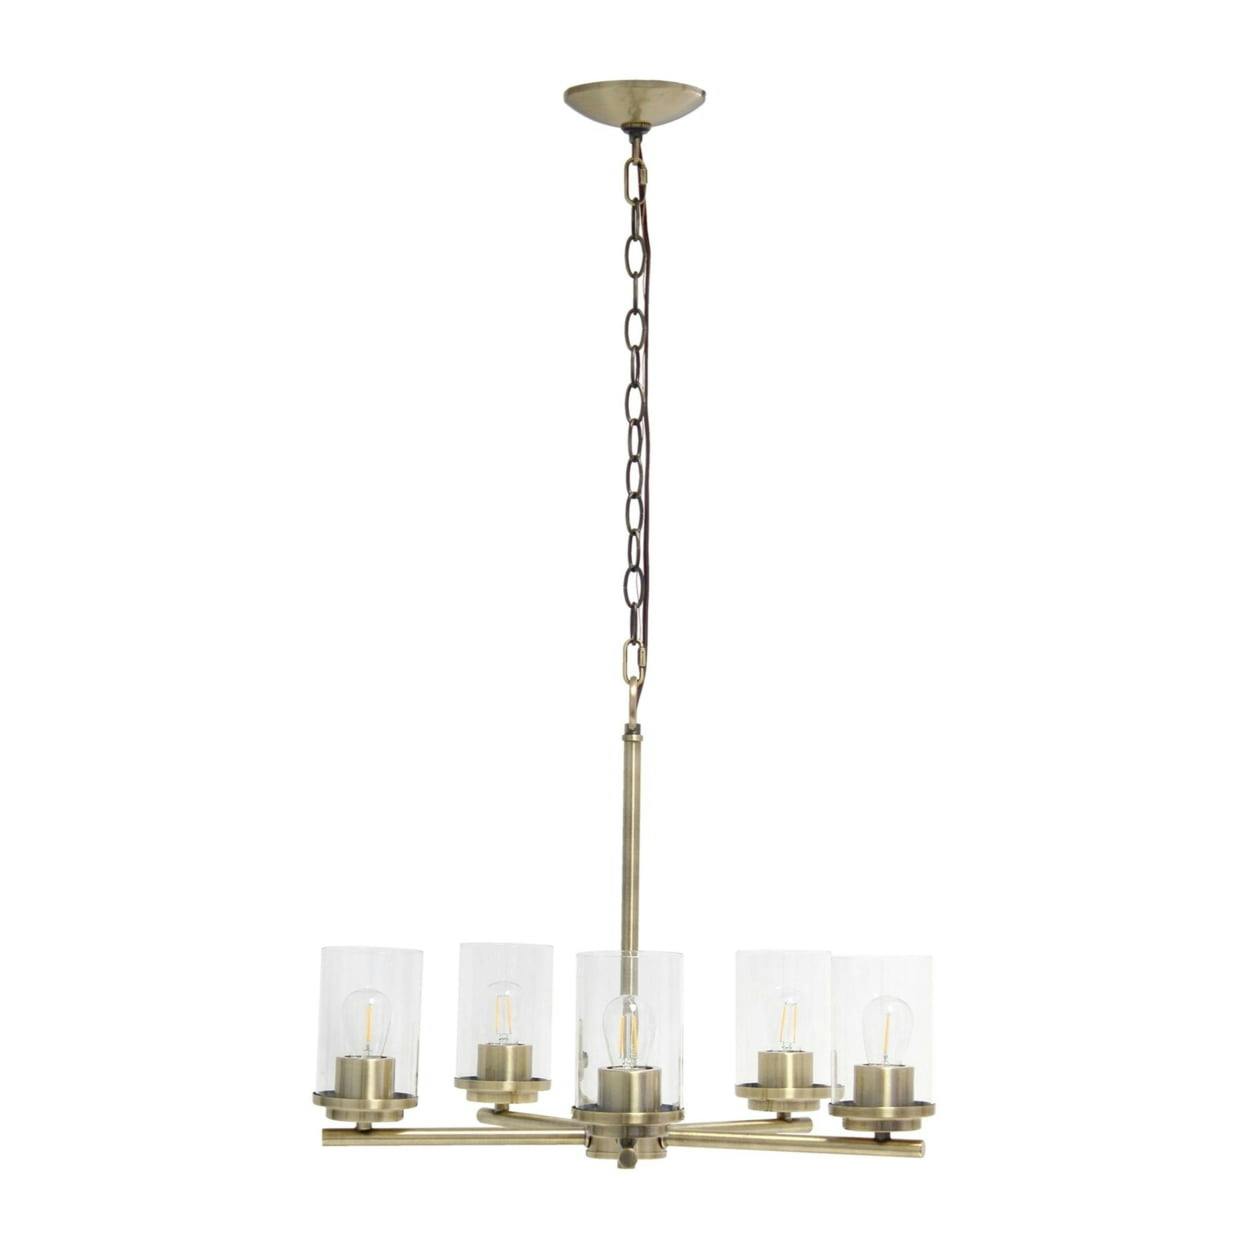 Elegant Antique Brass 5-Light Pendant with Clear Glass Shades